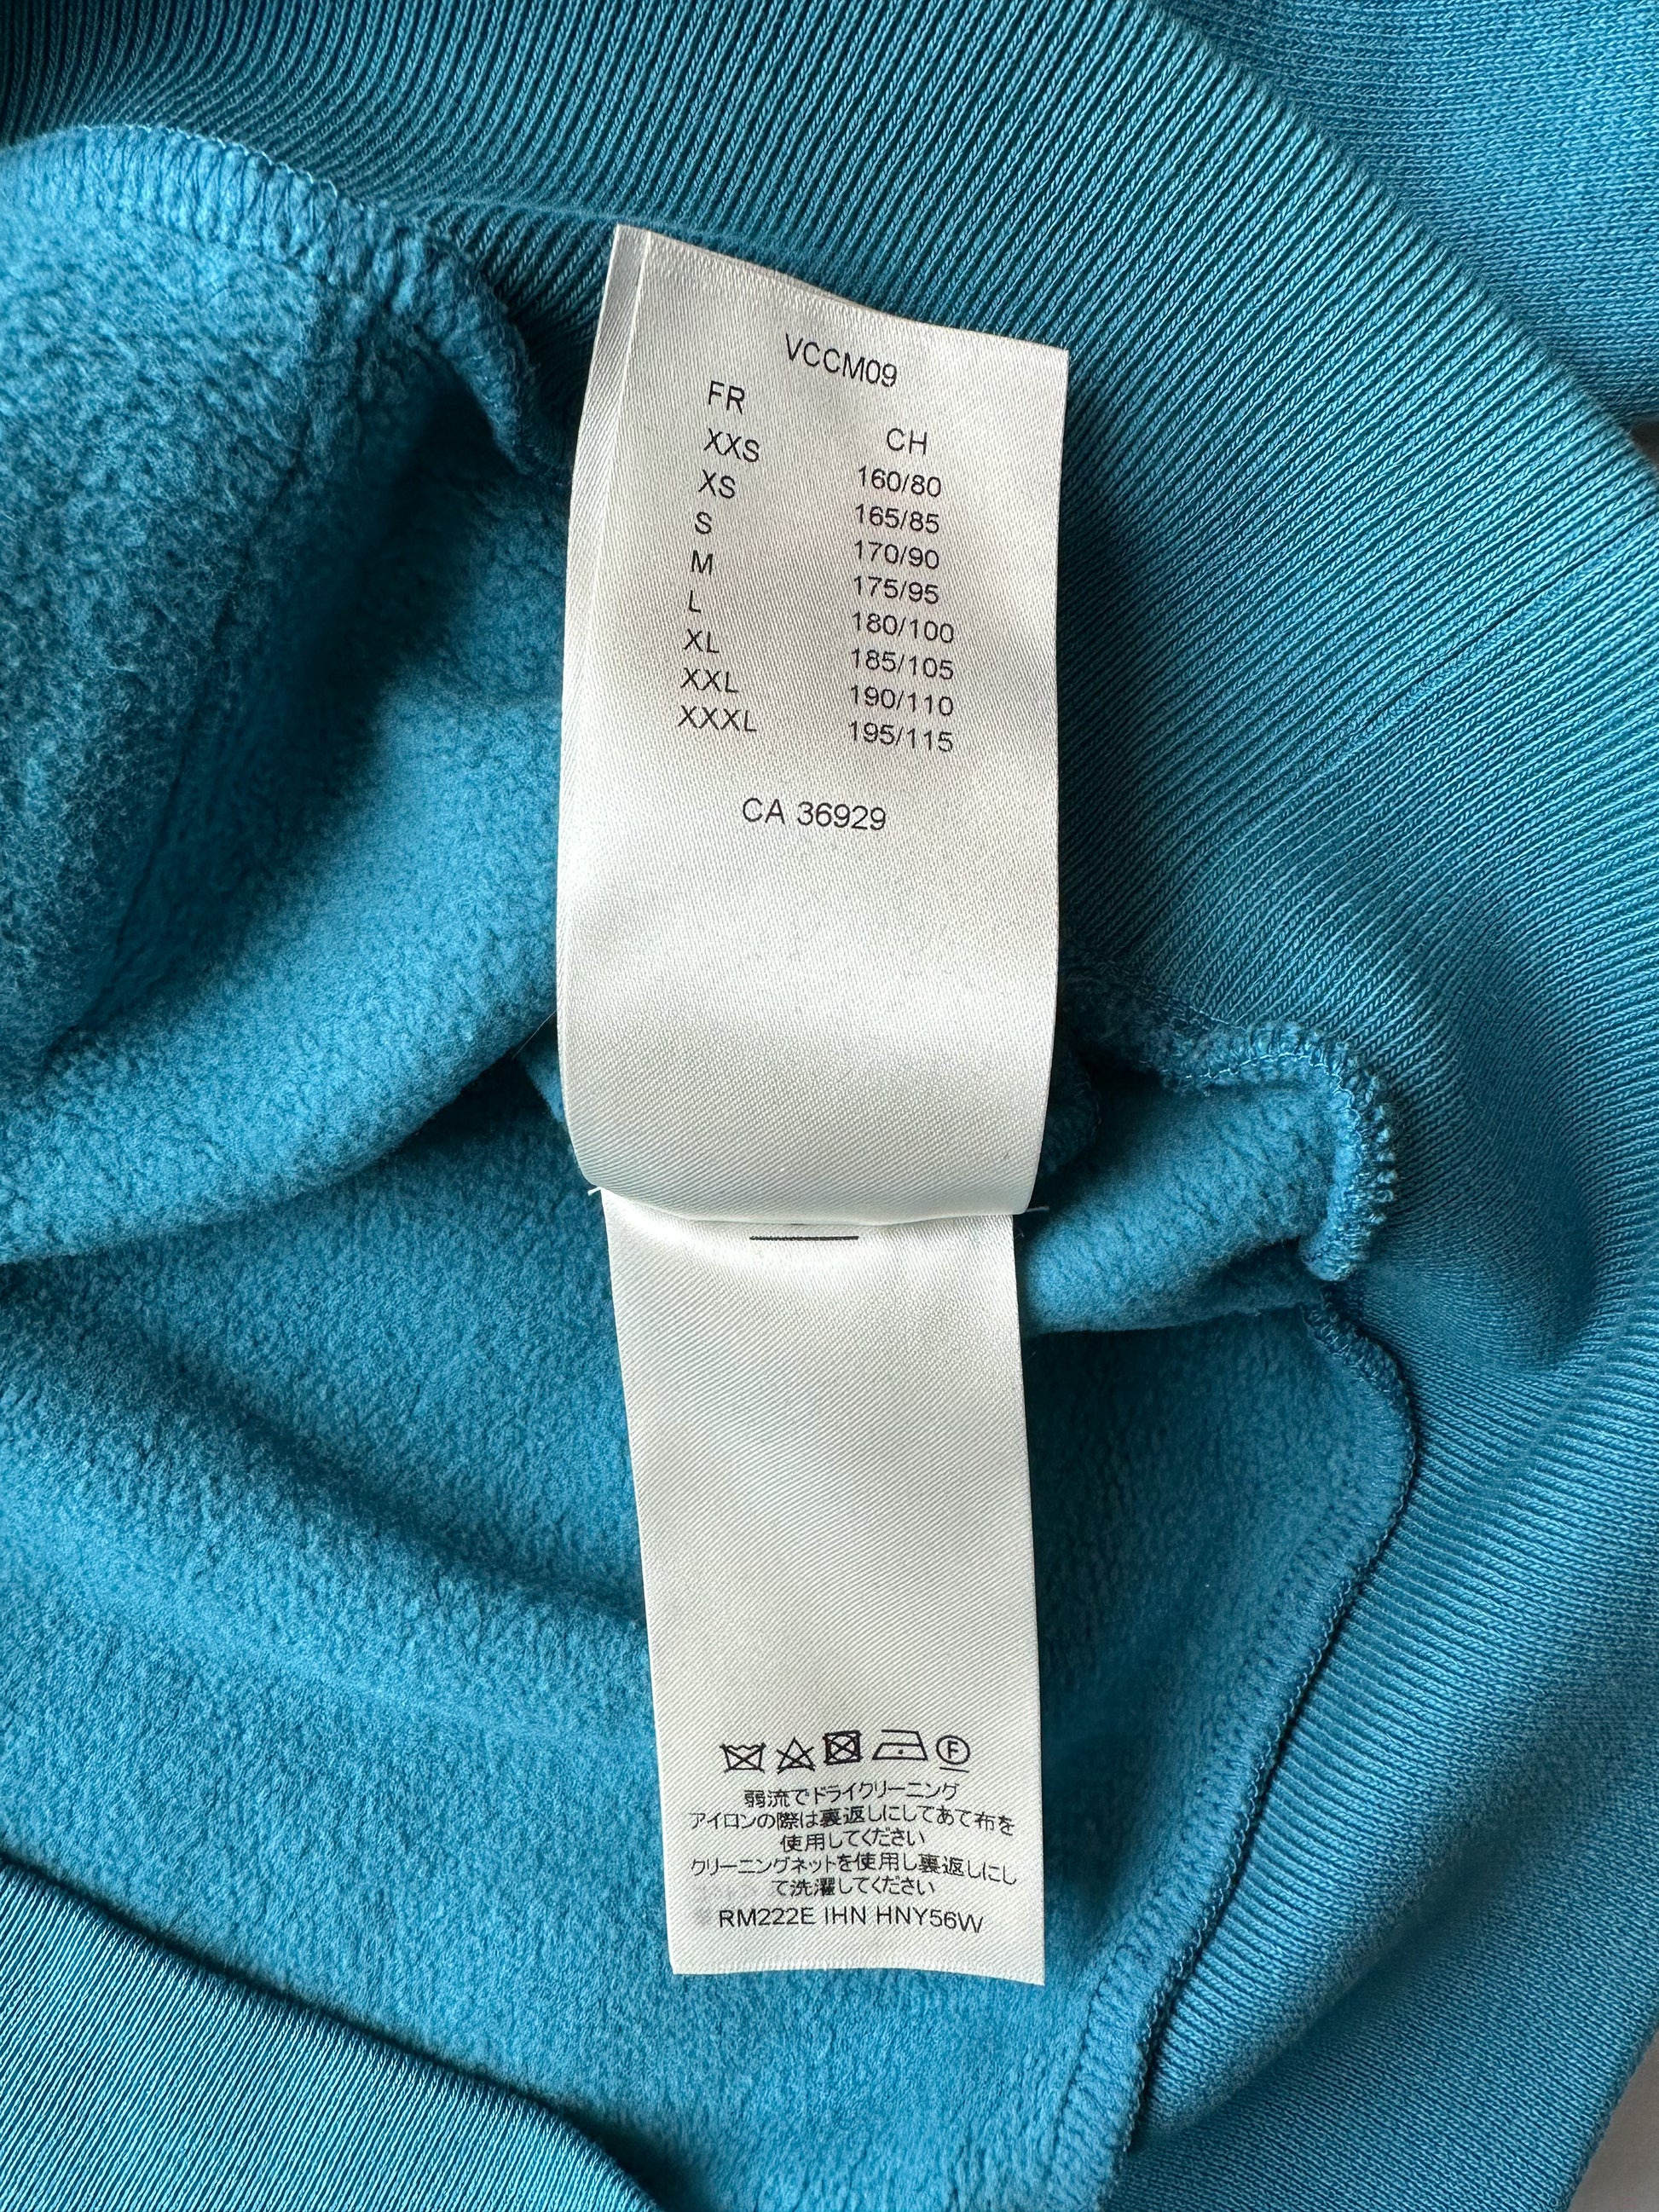 Louis Vuitton Ocean Embroidered Signature Hoodie